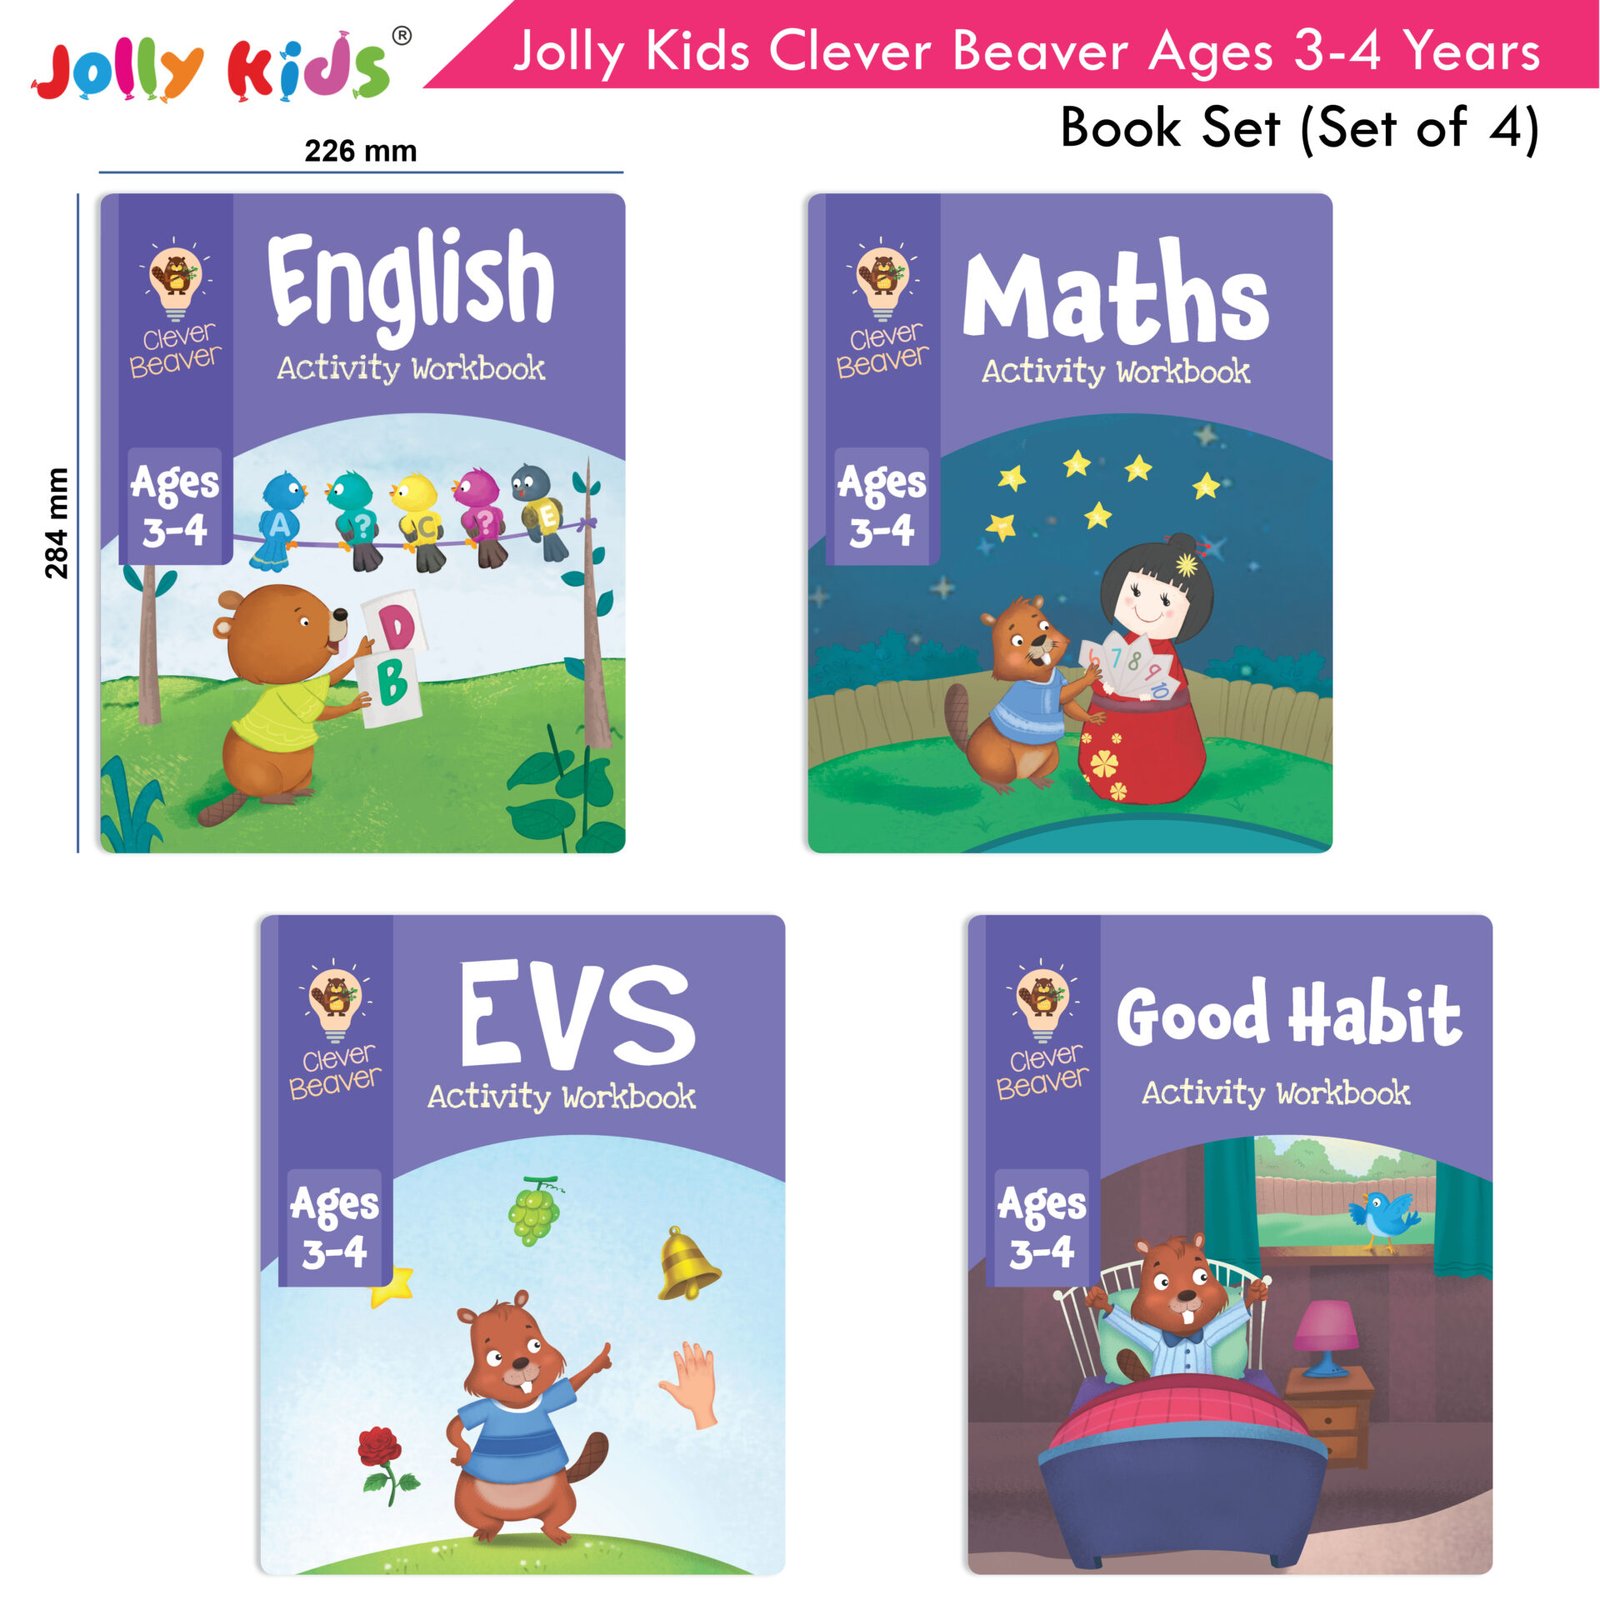 Jolly Kids Clever Beaver Ages 3 4 Years Book Set Set of 4 2